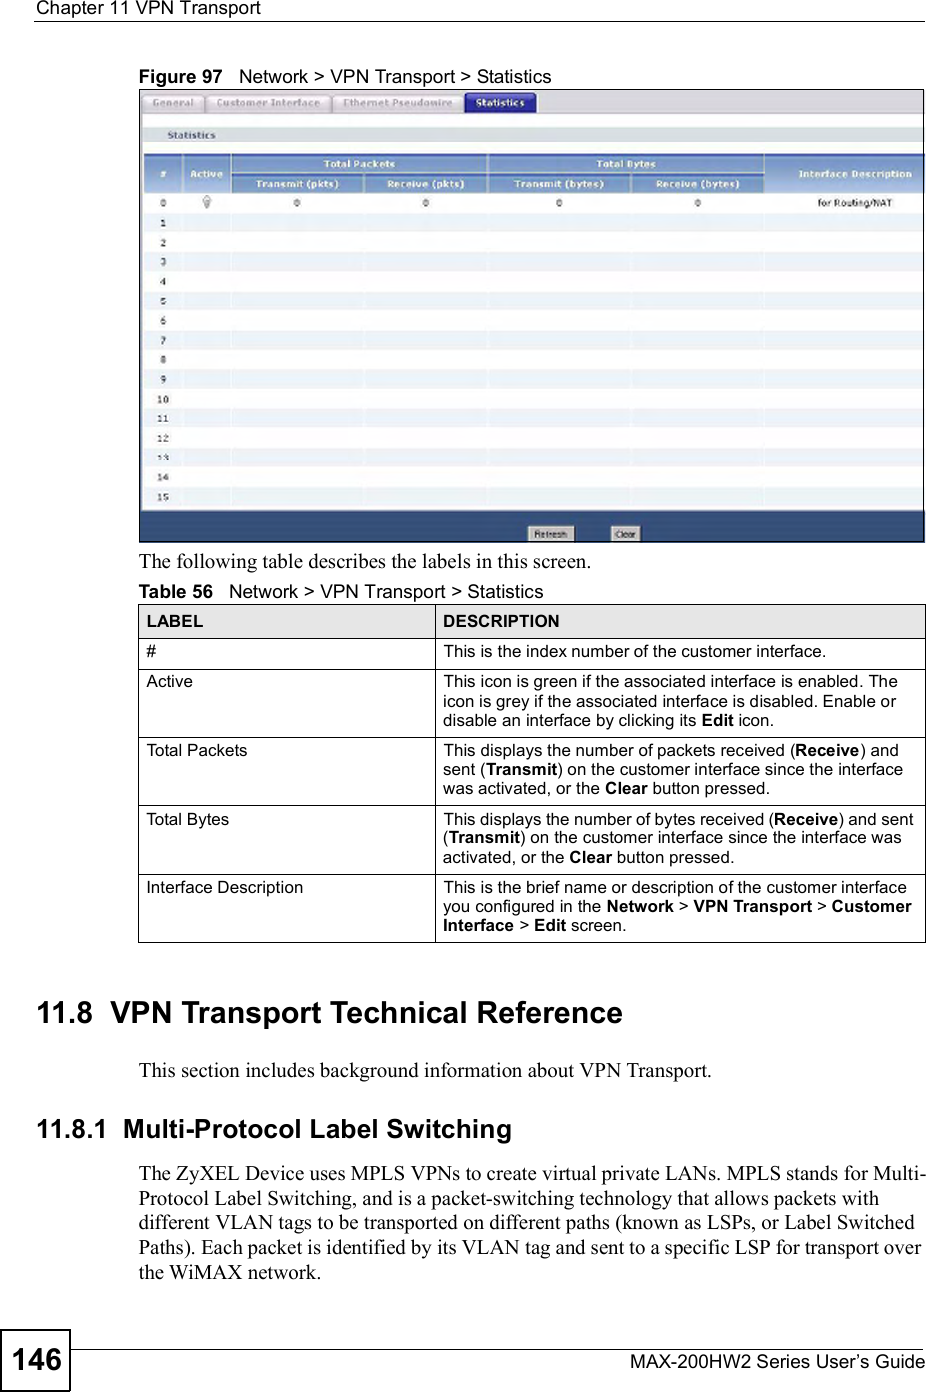 Chapter 11VPN TransportMAX-200HW2 Series User s Guide146Figure 97   Network &gt; VPN Transport &gt; StatisticsThe following table describes the labels in this screen.11.8  VPN Transport Technical ReferenceThis section includes background information about VPN Transport.11.8.1  Multi-Protocol Label SwitchingThe ZyXEL Device uses MPLS VPNs to create virtual private LANs. MPLS stands for Multi-Protocol Label Switching, and is a packet-switching technology that allows packets with different VLAN tags to be transported on different paths (known as LSPs, or Label Switched Paths). Each packet is identified by its VLAN tag and sent to a specific LSP for transport over the WiMAX network. Table 56   Network &gt; VPN Transport &gt; StatisticsLABEL DESCRIPTION#This is the index number of the customer interface.ActiveThis icon is green if the associated interface is enabled. The icon is grey if the associated interface is disabled. Enable or disable an interface by clicking its Edit icon.Total PacketsThis displays the number of packets received (Receive) and sent (Transmit) on the customer interface since the interface was activated, or the Clear button pressed.Total BytesThis displays the number of bytes received (Receive) and sent (Transmit) on the customer interface since the interface was activated, or the Clear button pressed.Interface DescriptionThis is the brief name or description of the customer interface you configured in the Network &gt; VPN Transport &gt; Customer Interface &gt; Edit screen.